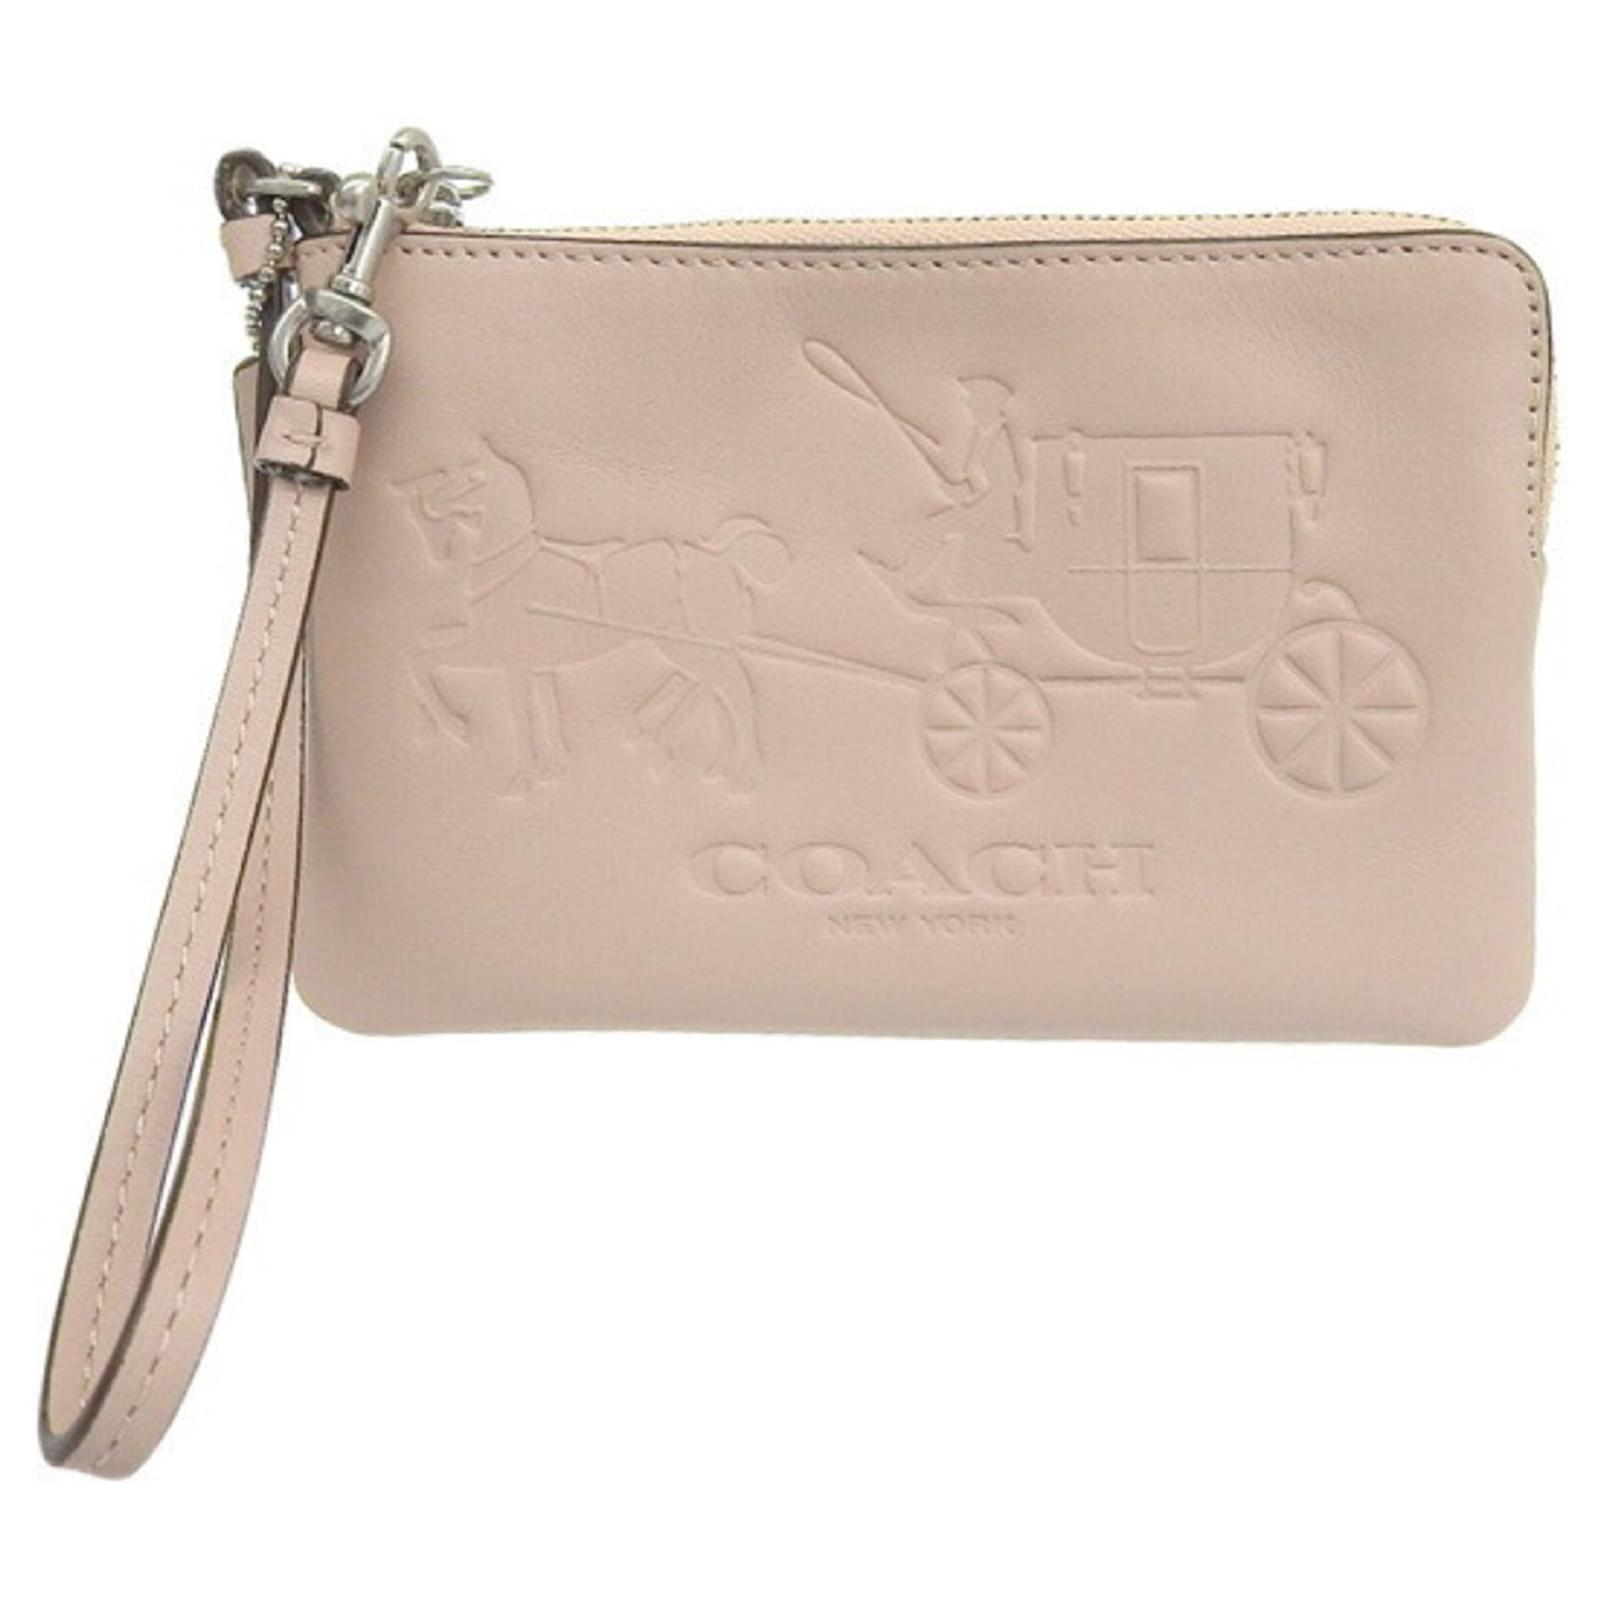 Coach Pleated Leather Wristlet Rose Pink Silver Clip In Clutch Pouch Bag -  $31 - From Emmie